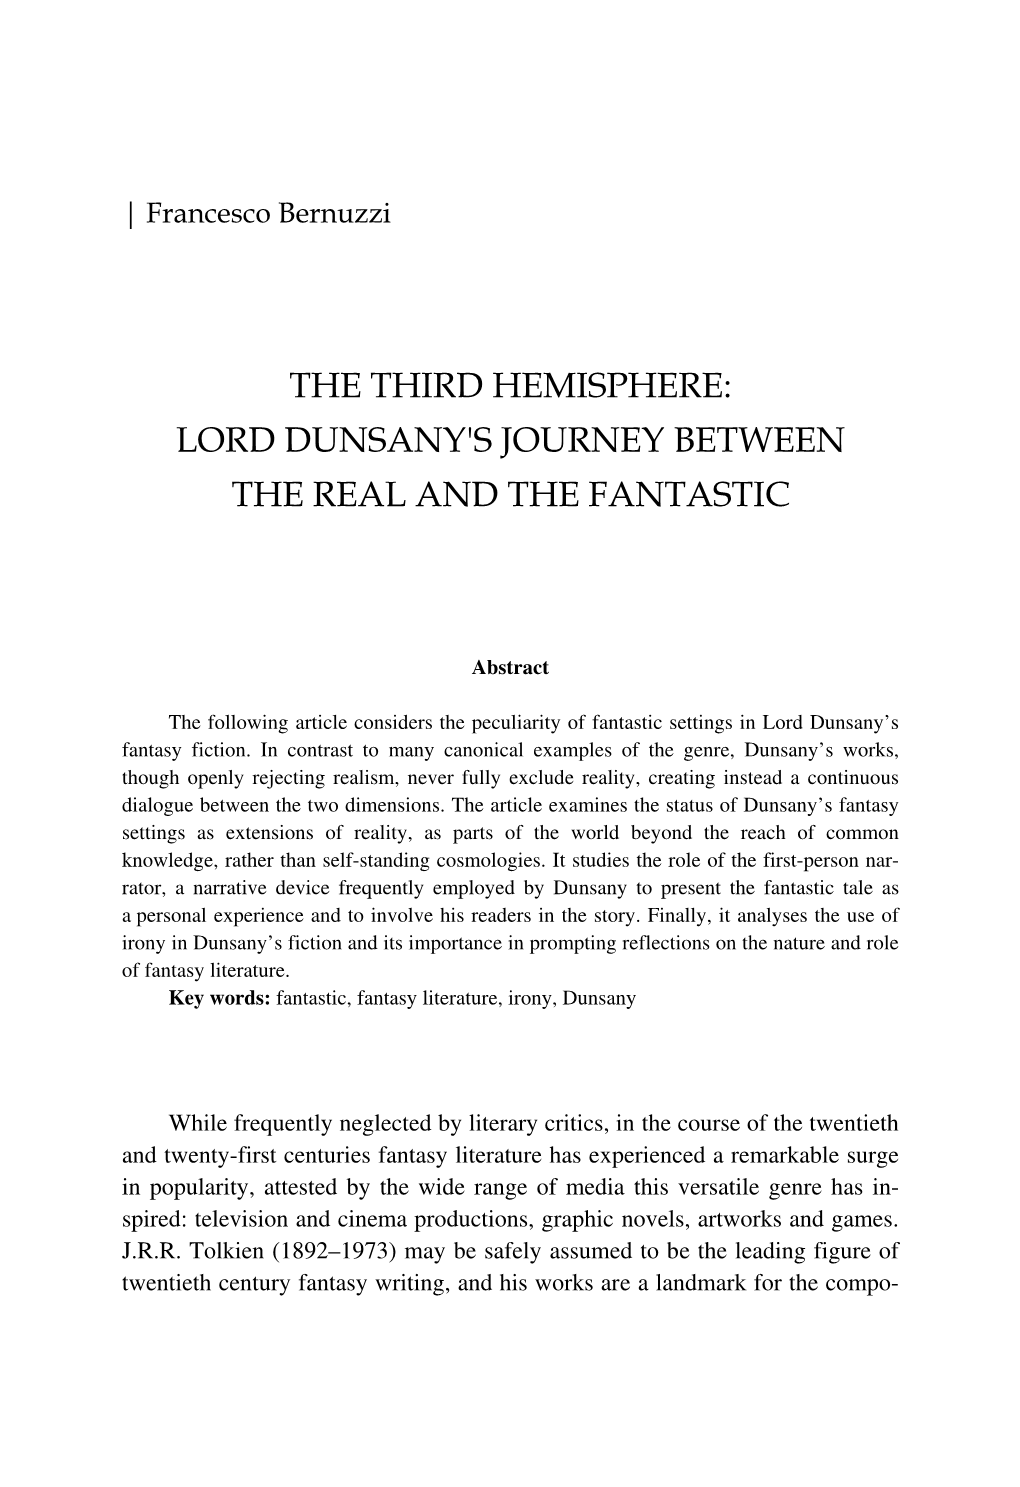 The Third Hemisphere. Lord Dunsany's Journeys Between The